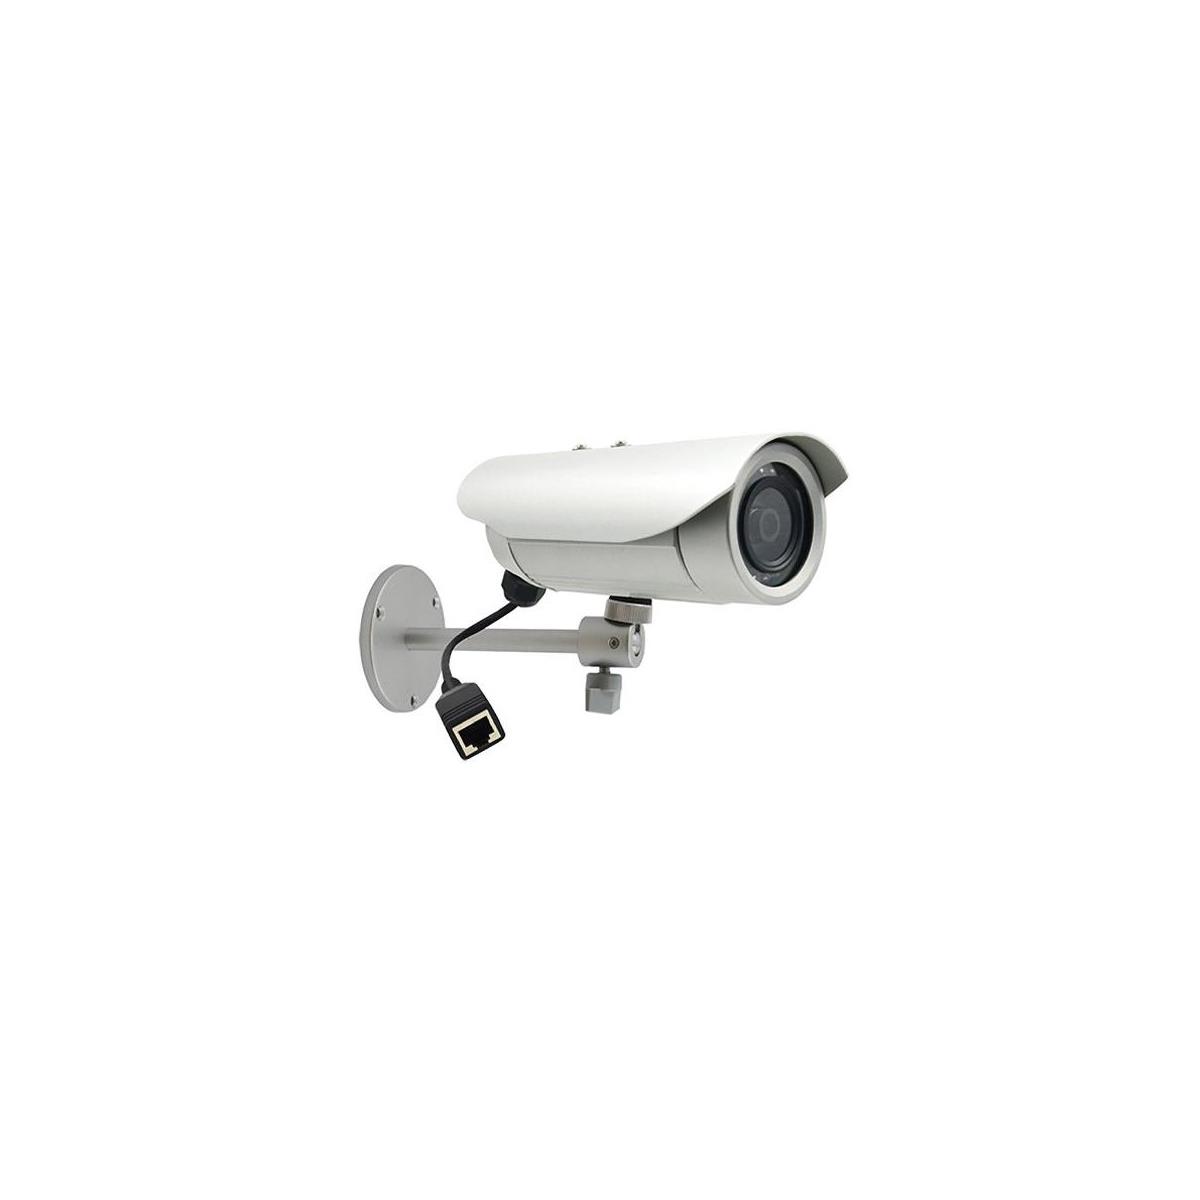 Image of ACTi E36 Day/Night Outdoor IP Bullet Camera